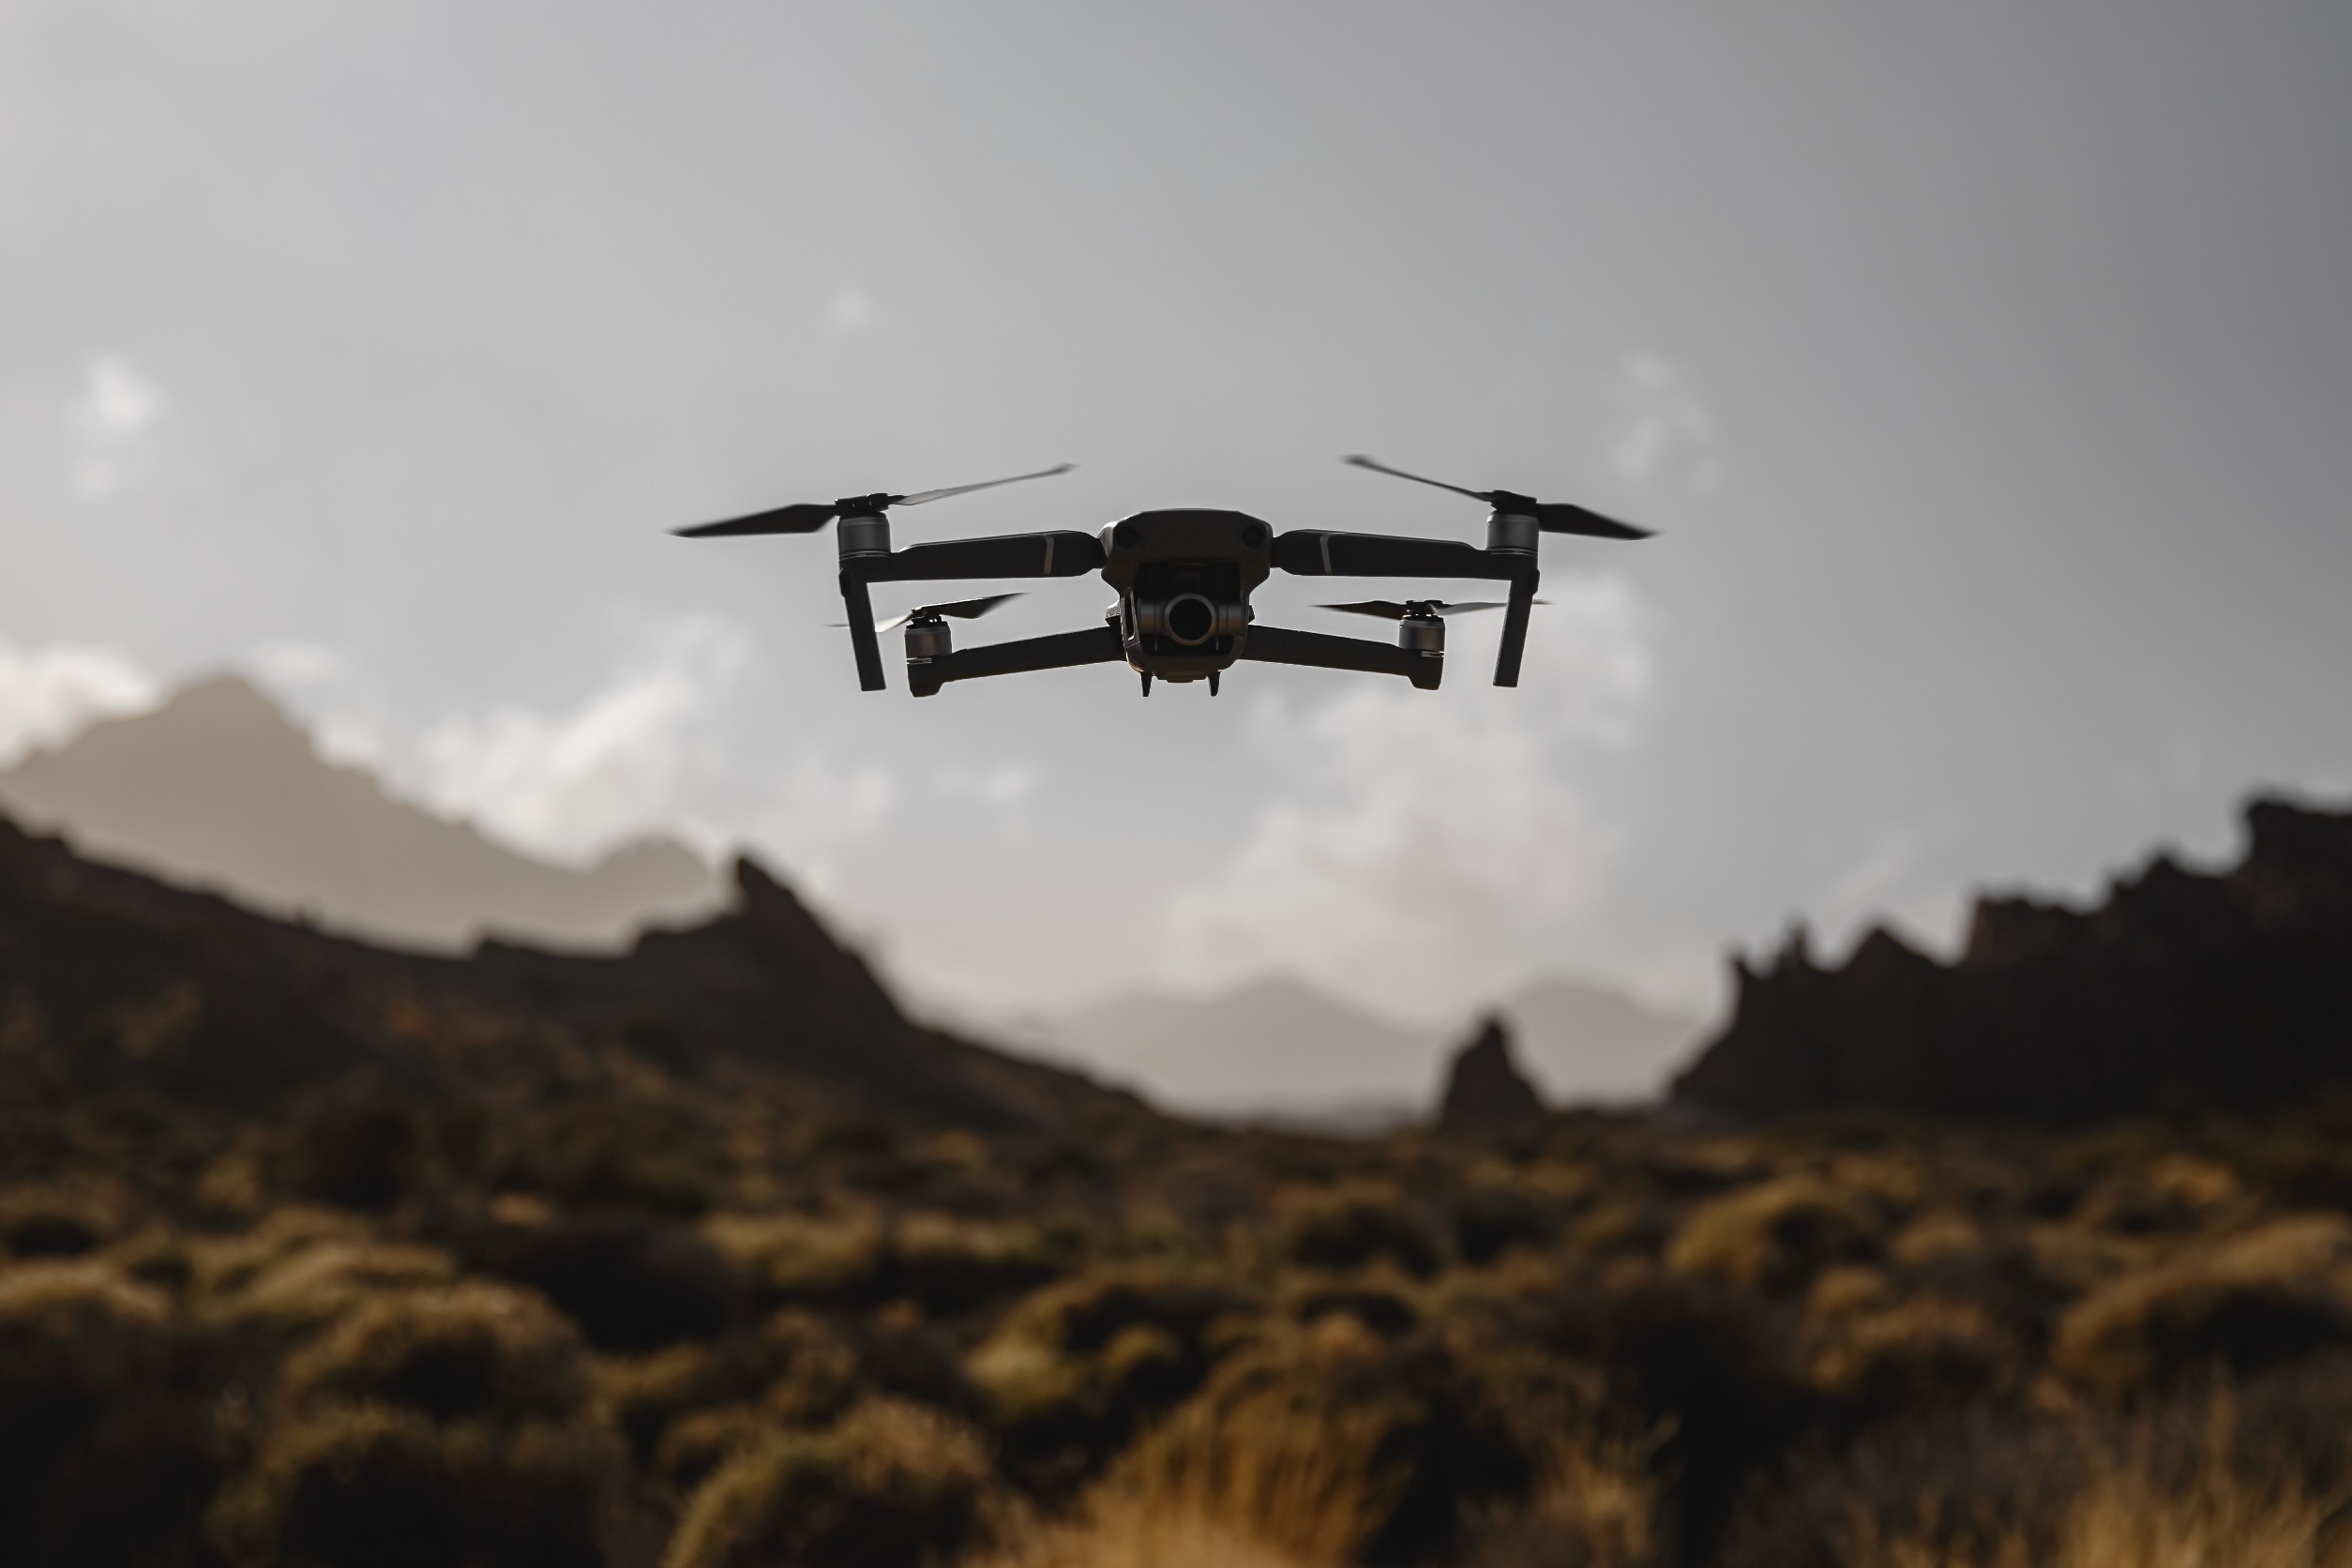 ROLE OF DRONES IN CANNABIS